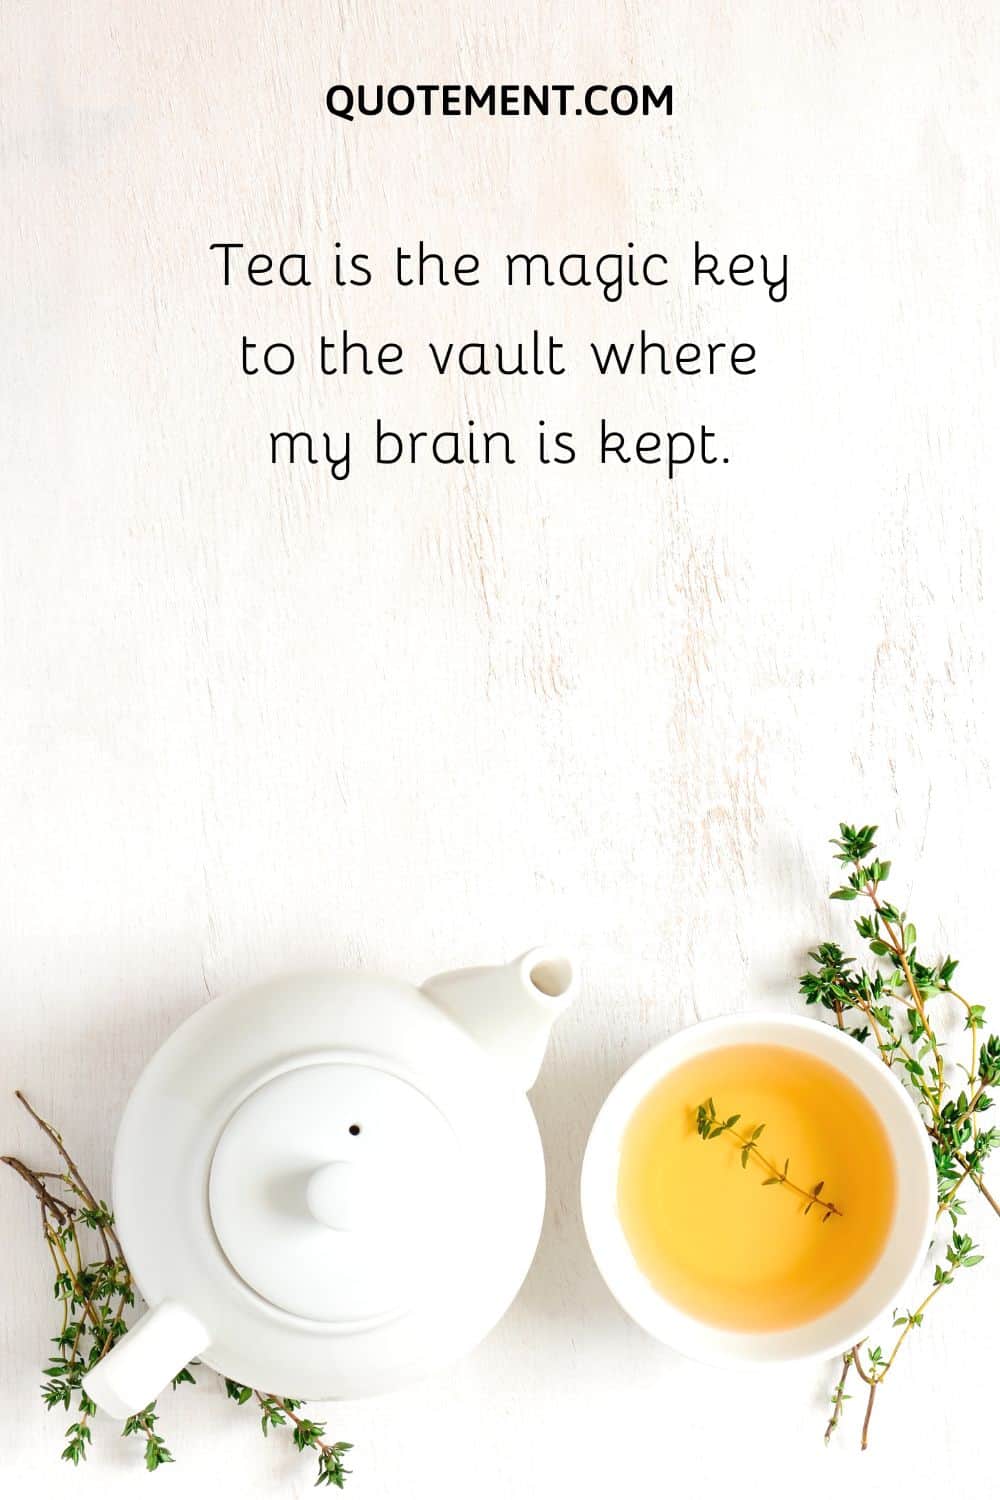 Tea is the magic key to the vault where my brain is kept.